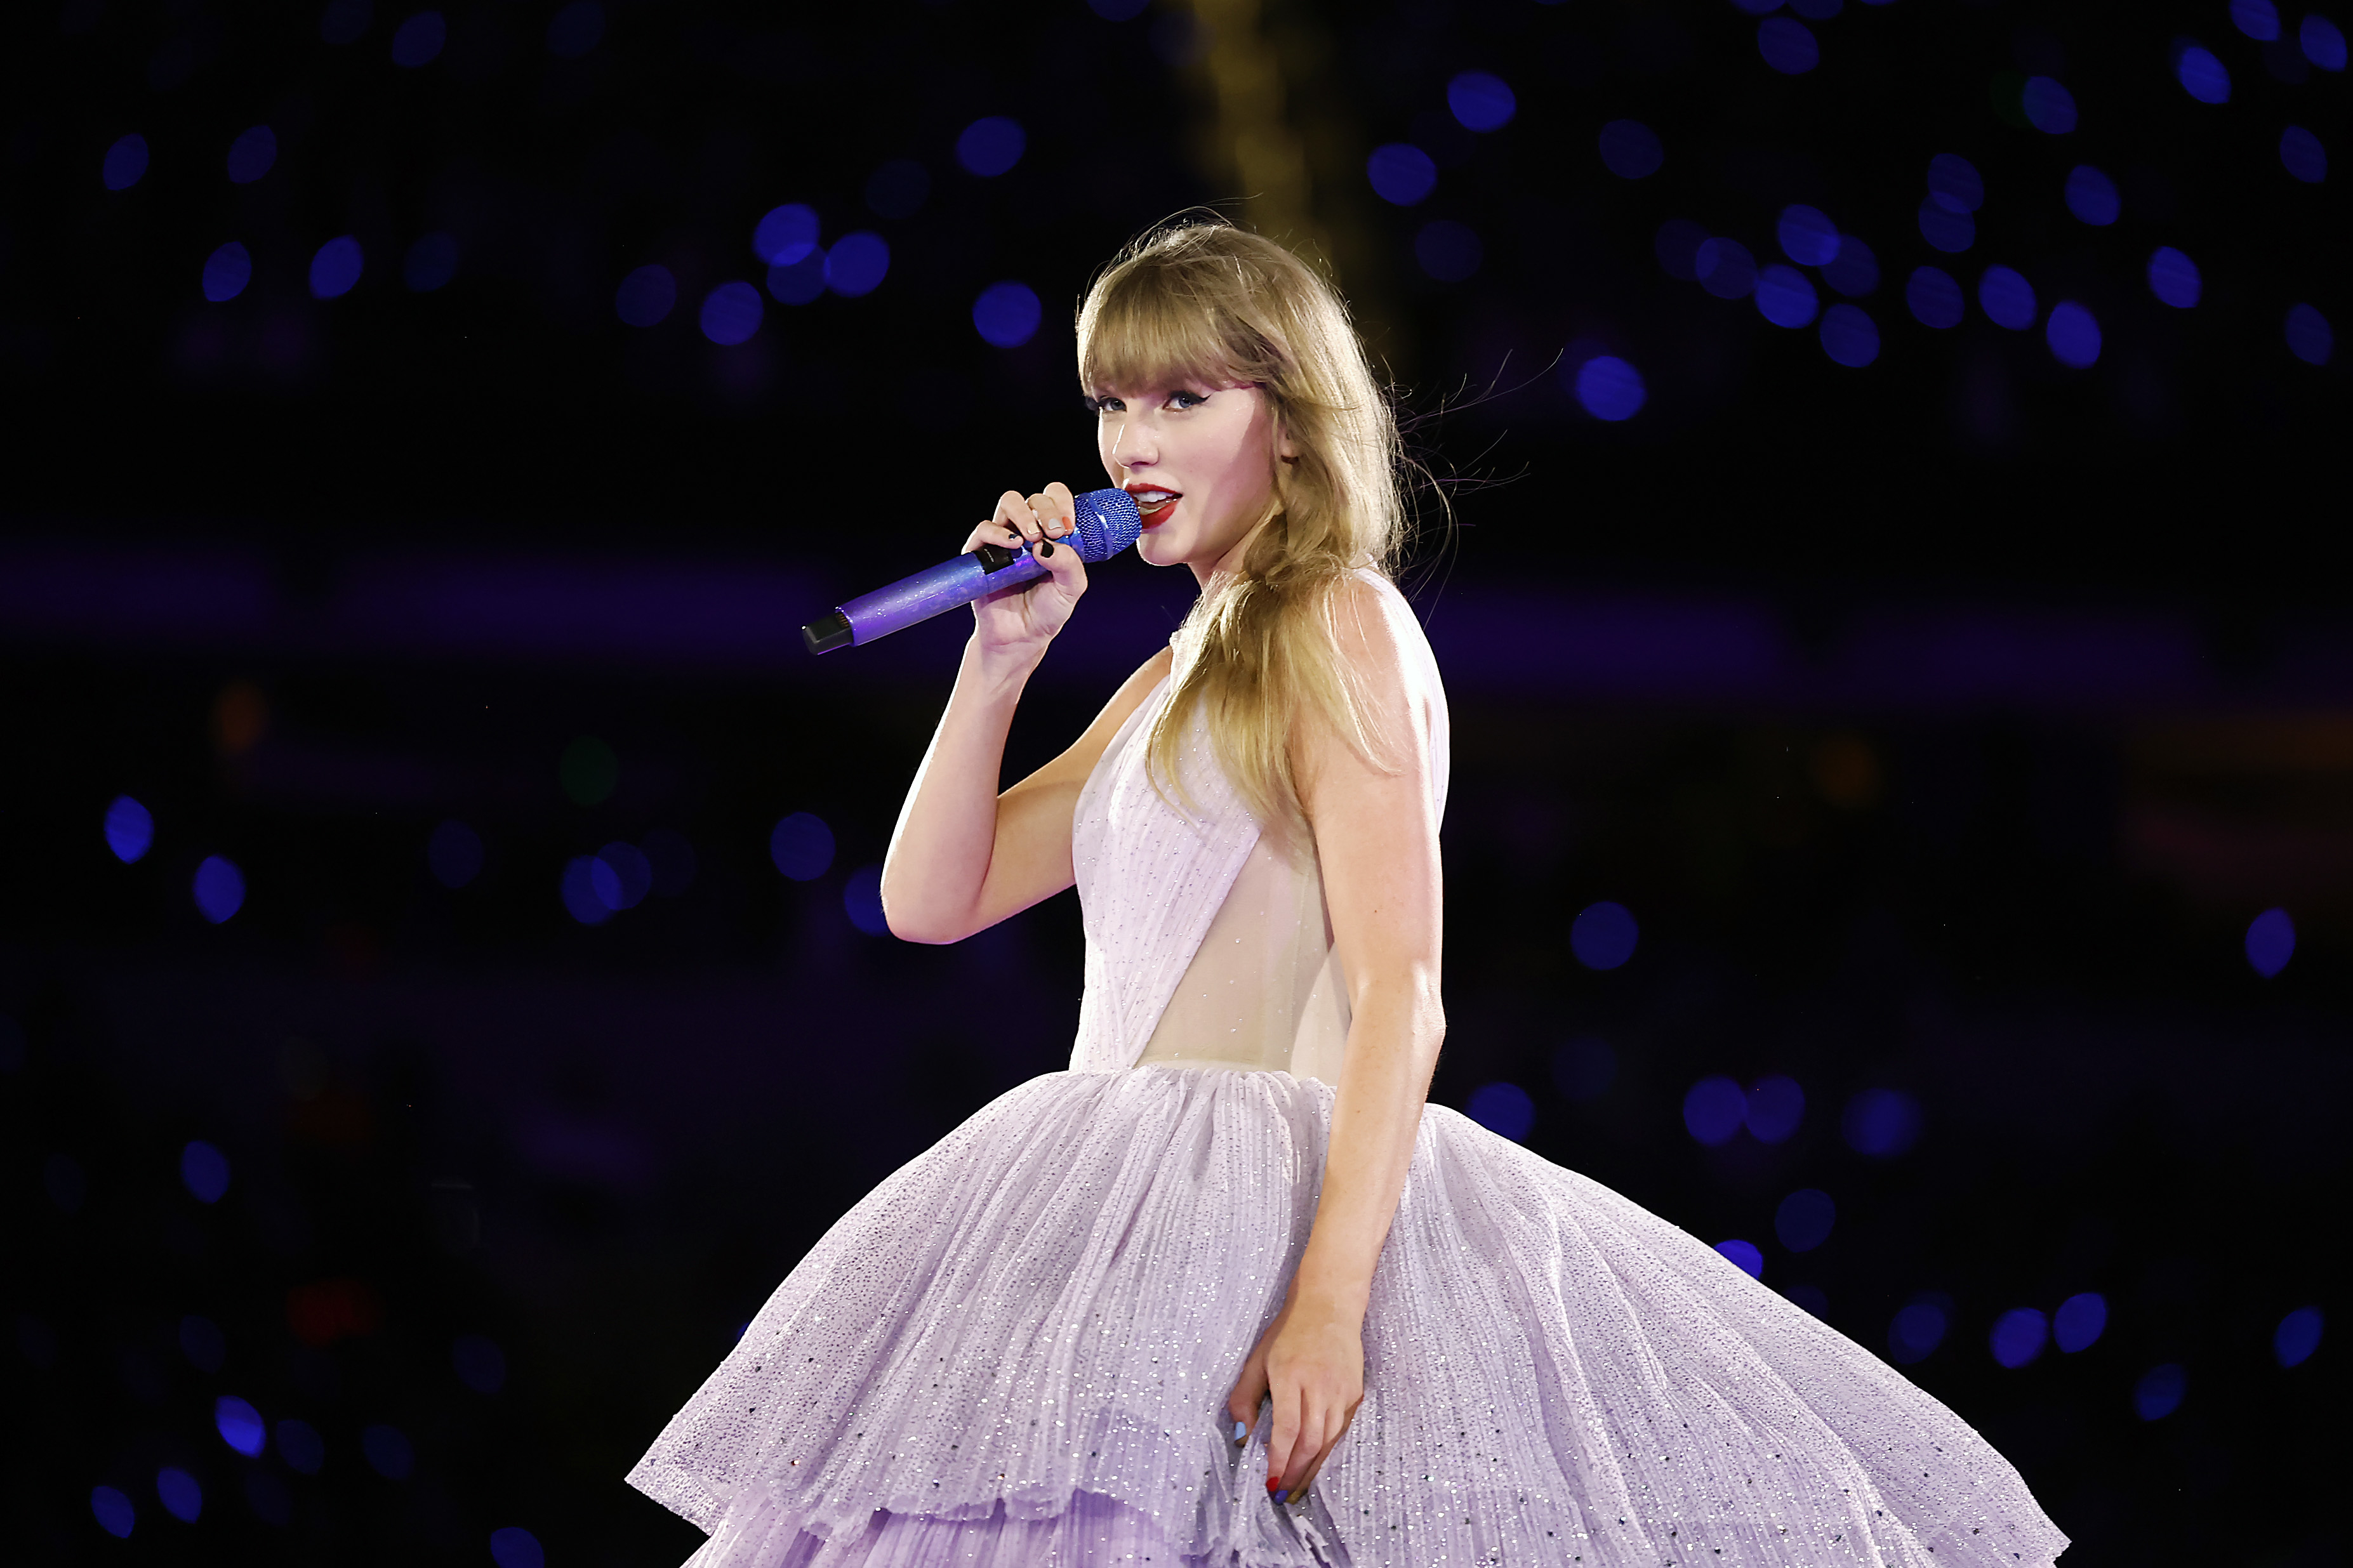 Close-up of Taylor performing